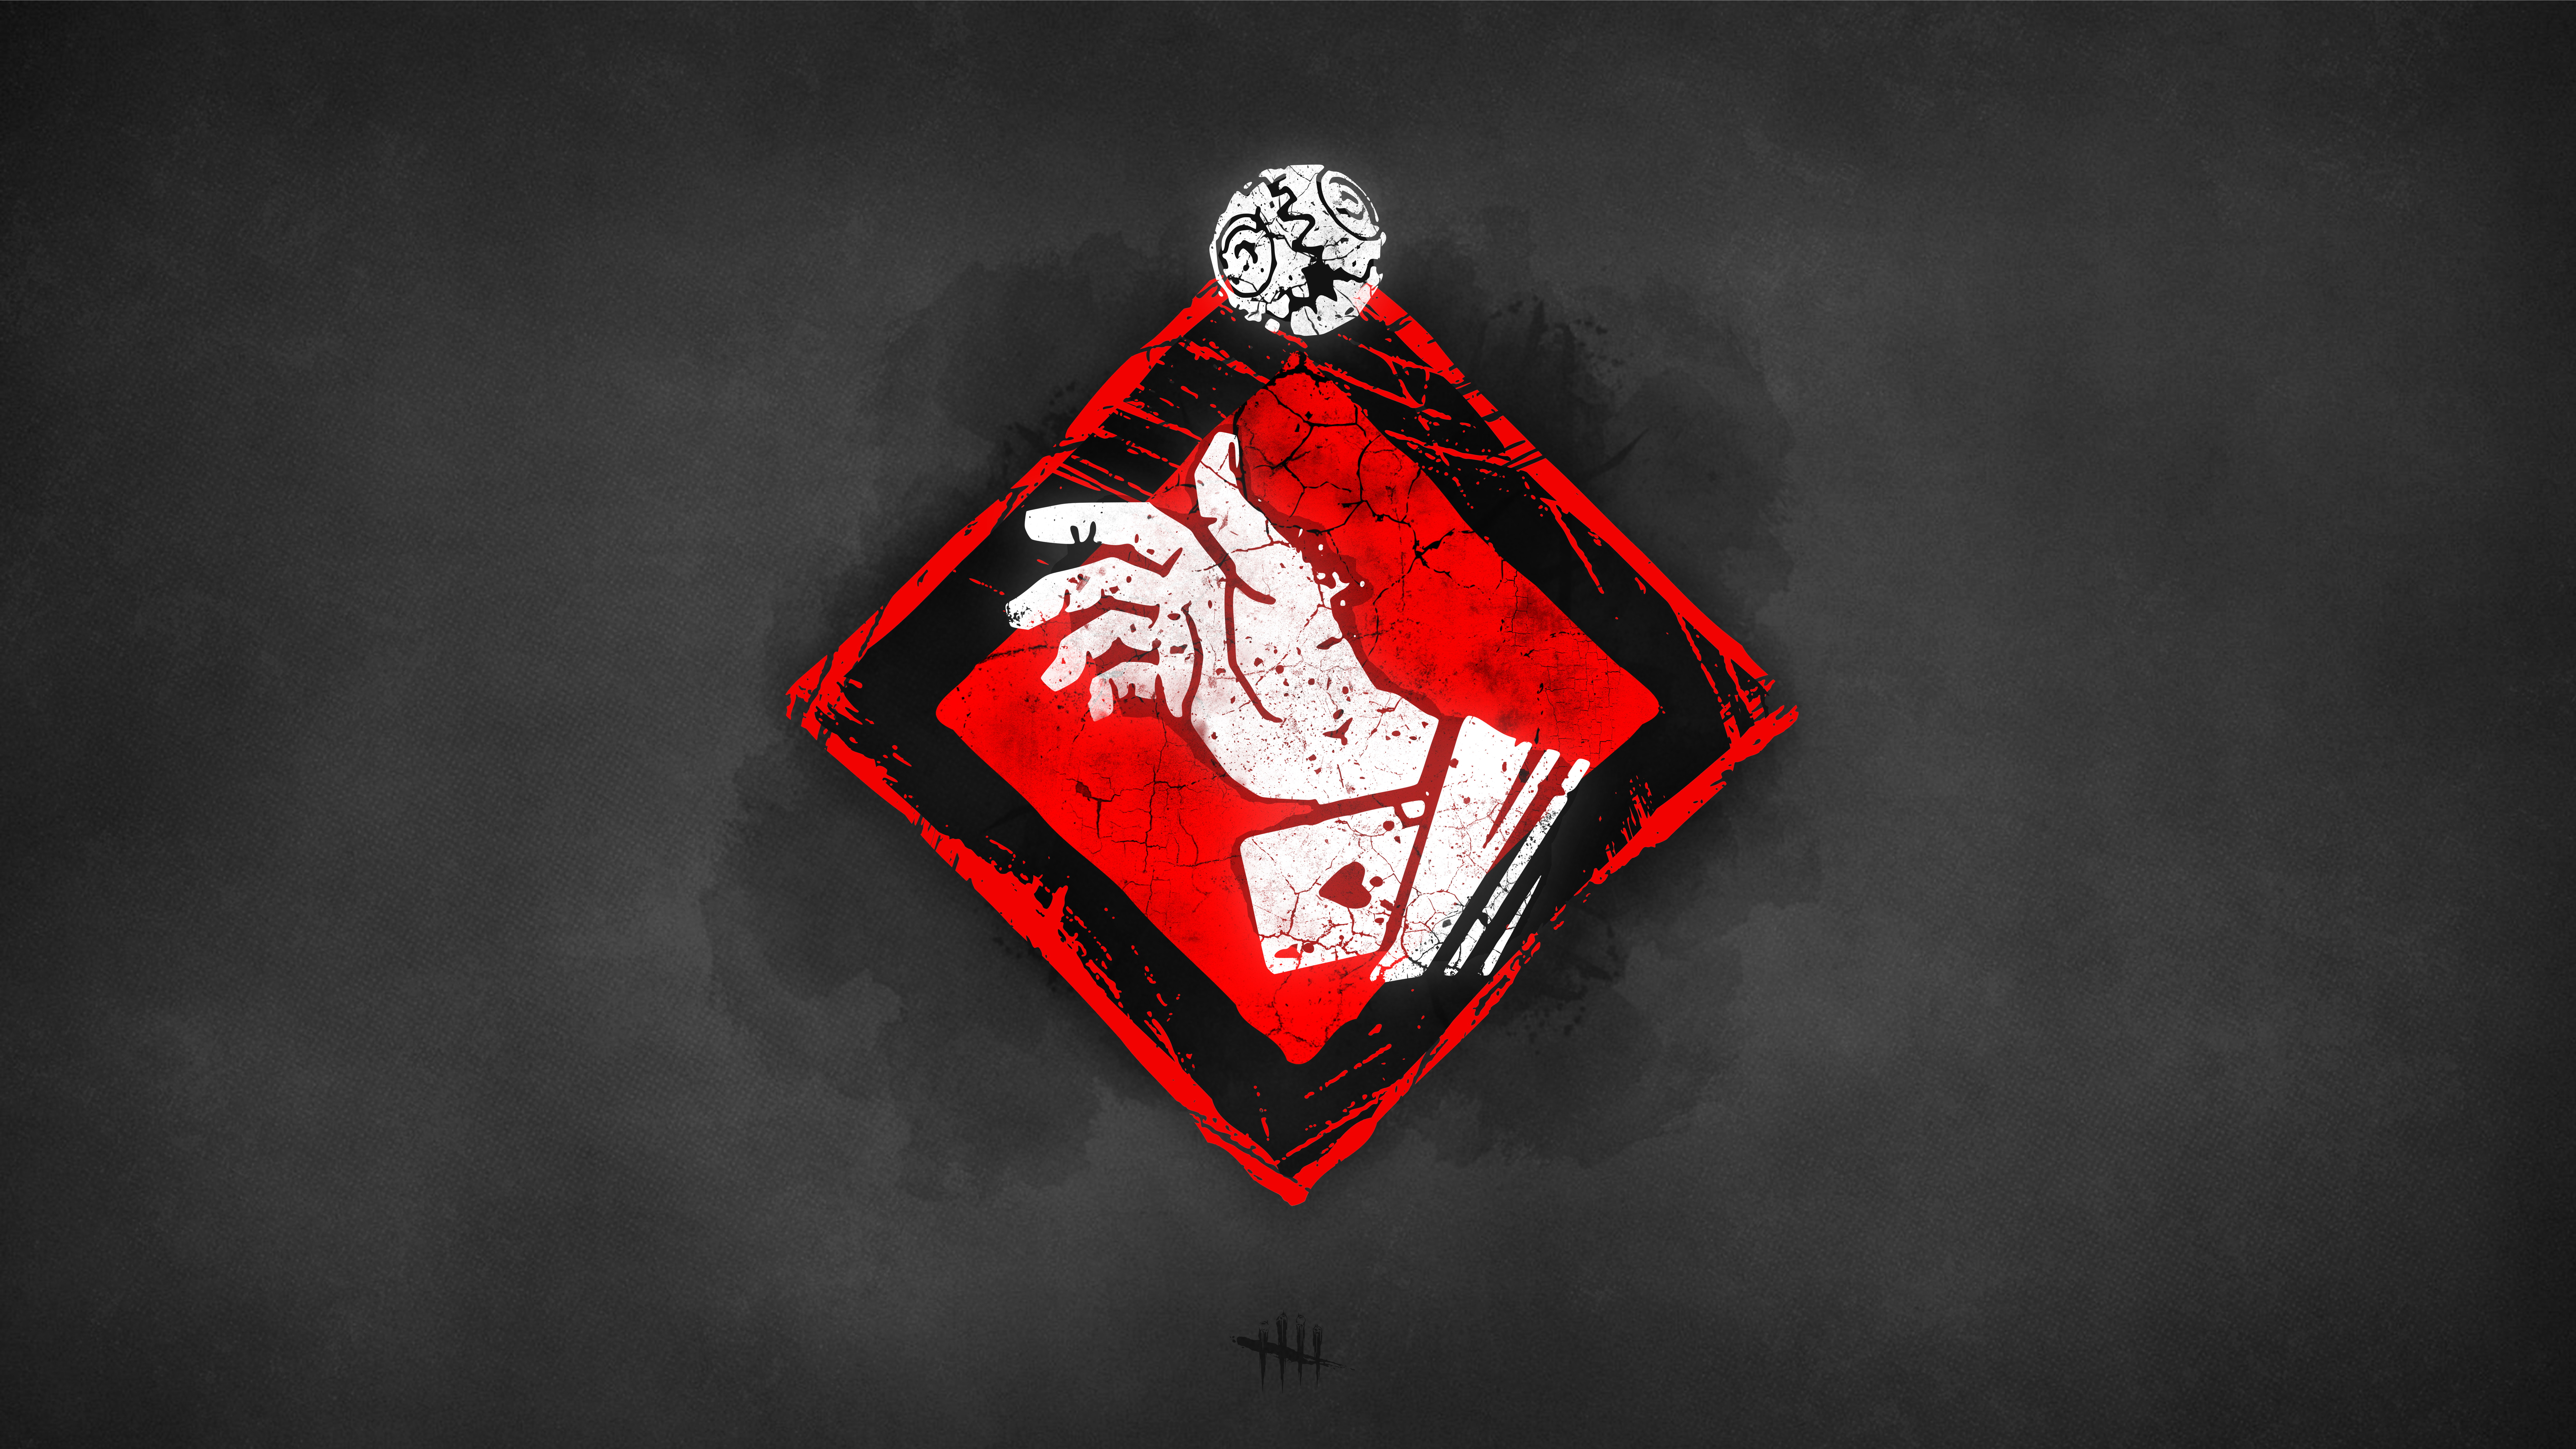 Ace In The Hole Dead By Daylight Ace Visconti Dead By Daylight Minimalist 12000x6750